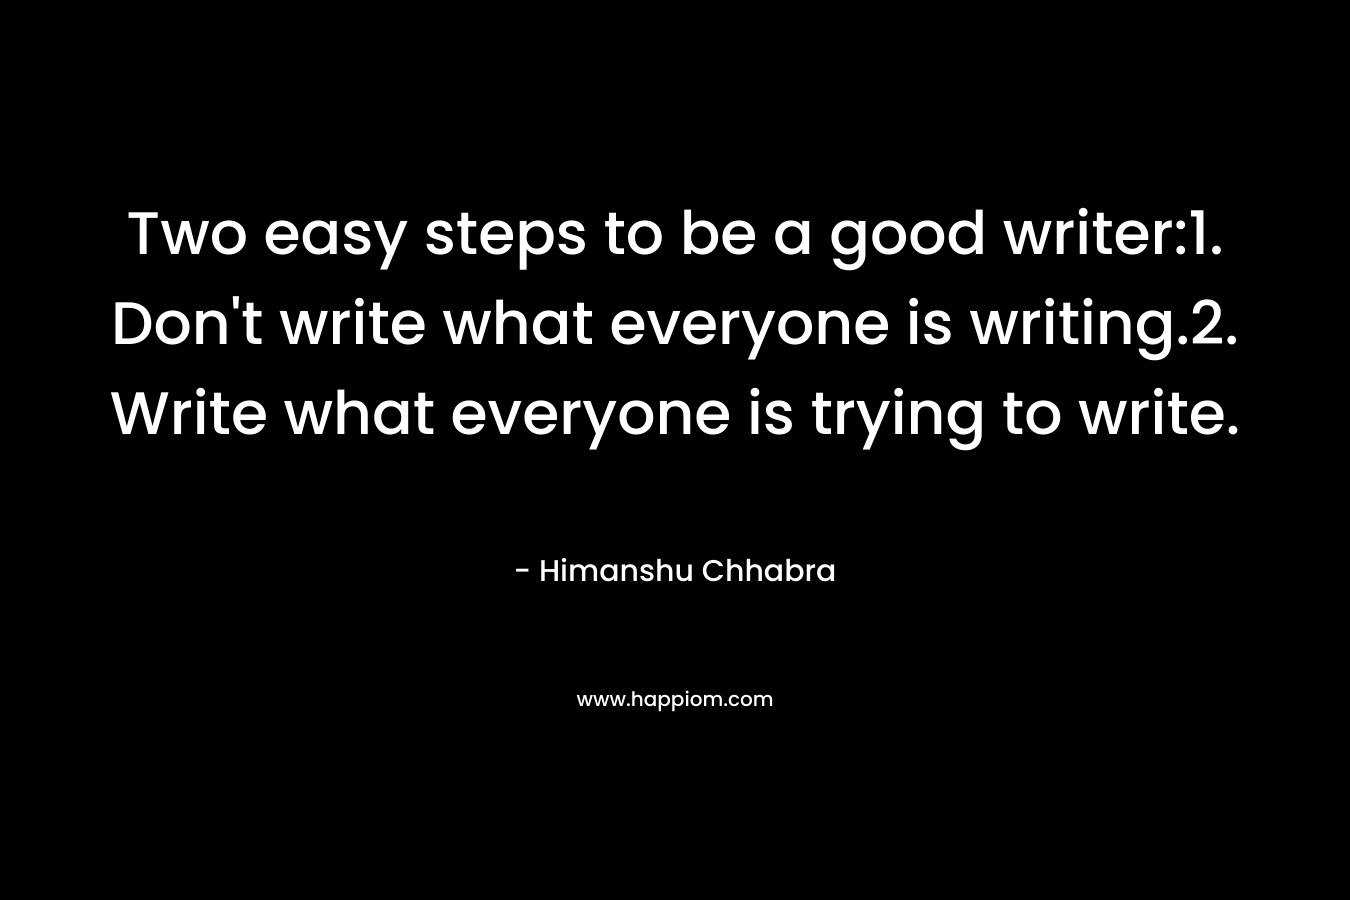 Two easy steps to be a good writer:1. Don’t write what everyone is writing.2. Write what everyone is trying to write. – Himanshu Chhabra